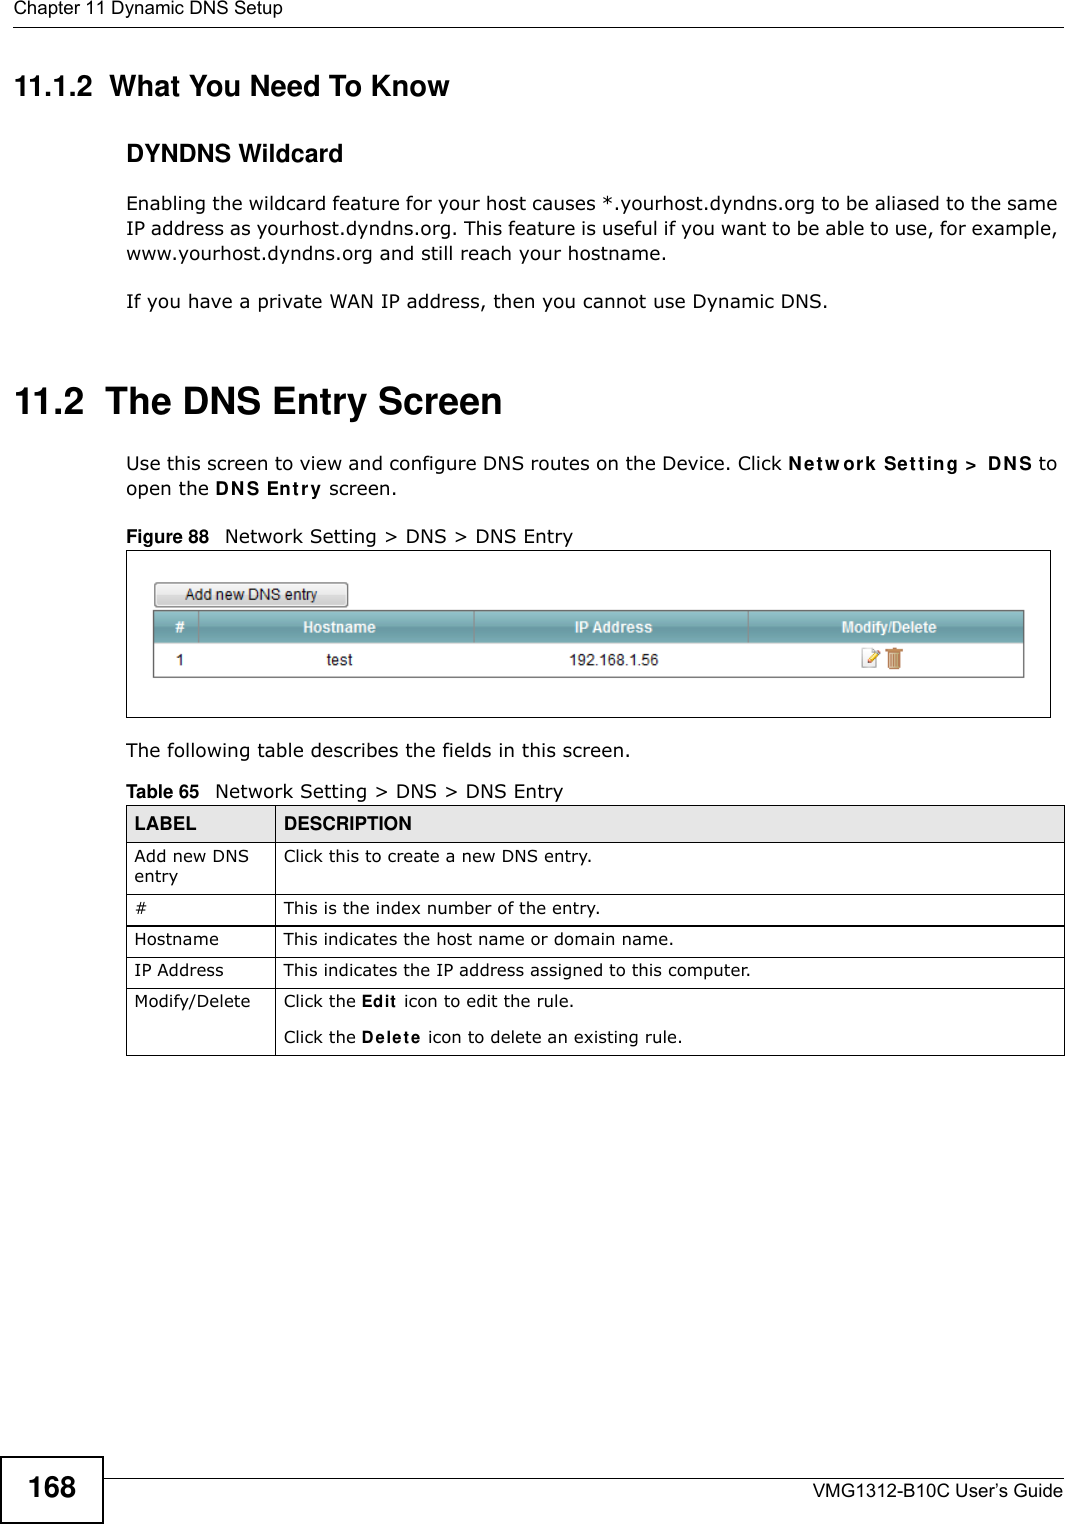 Chapter 11 Dynamic DNS SetupVMG1312-B10C User’s Guide16811.1.2  What You Need To KnowDYNDNS WildcardEnabling the wildcard feature for your host causes *.yourhost.dyndns.org to be aliased to the same IP address as yourhost.dyndns.org. This feature is useful if you want to be able to use, for example, www.yourhost.dyndns.org and still reach your hostname.If you have a private WAN IP address, then you cannot use Dynamic DNS.11.2  The DNS Entry ScreenUse this screen to view and configure DNS routes on the Device. Click Ne t w ork  Se t t ing &gt;  D N S to open the D N S Ent ry screen.Figure 88   Network Setting &gt; DNS &gt; DNS EntryThe following table describes the fields in this screen. Table 65   Network Setting &gt; DNS &gt; DNS EntryLABEL DESCRIPTIONAdd new DNS entryClick this to create a new DNS entry.#This is the index number of the entry.Hostname This indicates the host name or domain name.IP Address This indicates the IP address assigned to this computer.Modify/Delete Click the Ed it  icon to edit the rule.Click the De le t e icon to delete an existing rule.